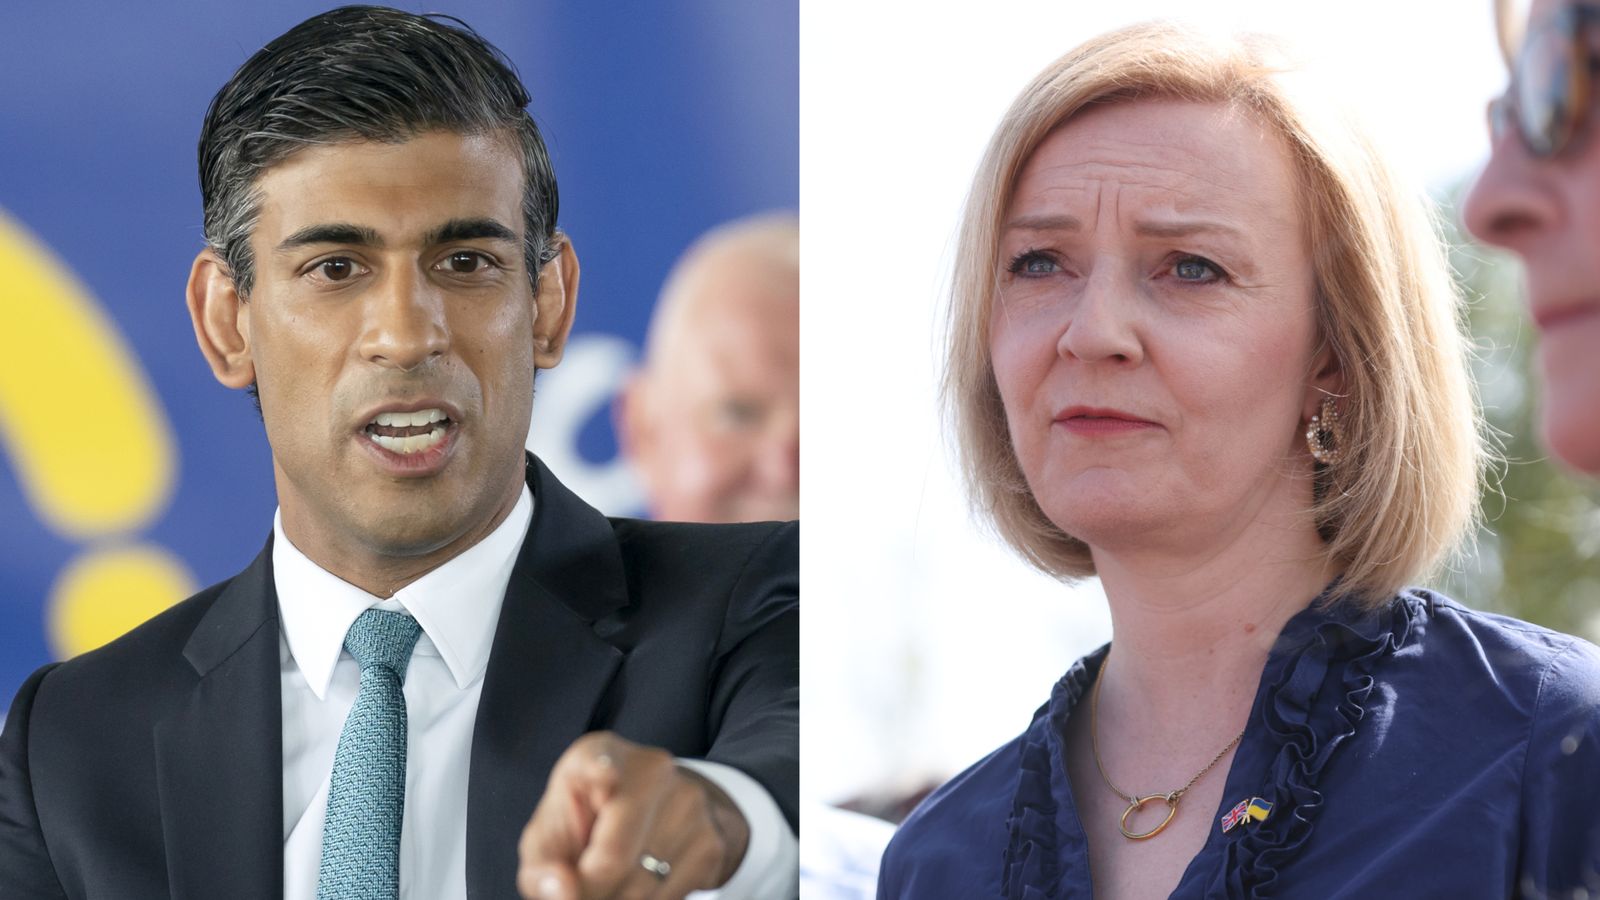 Tory leadership race: Rishi Sunak claims he is ‘underdog’ as Liz Truss blames France for travel chaos in Dover | Politics News